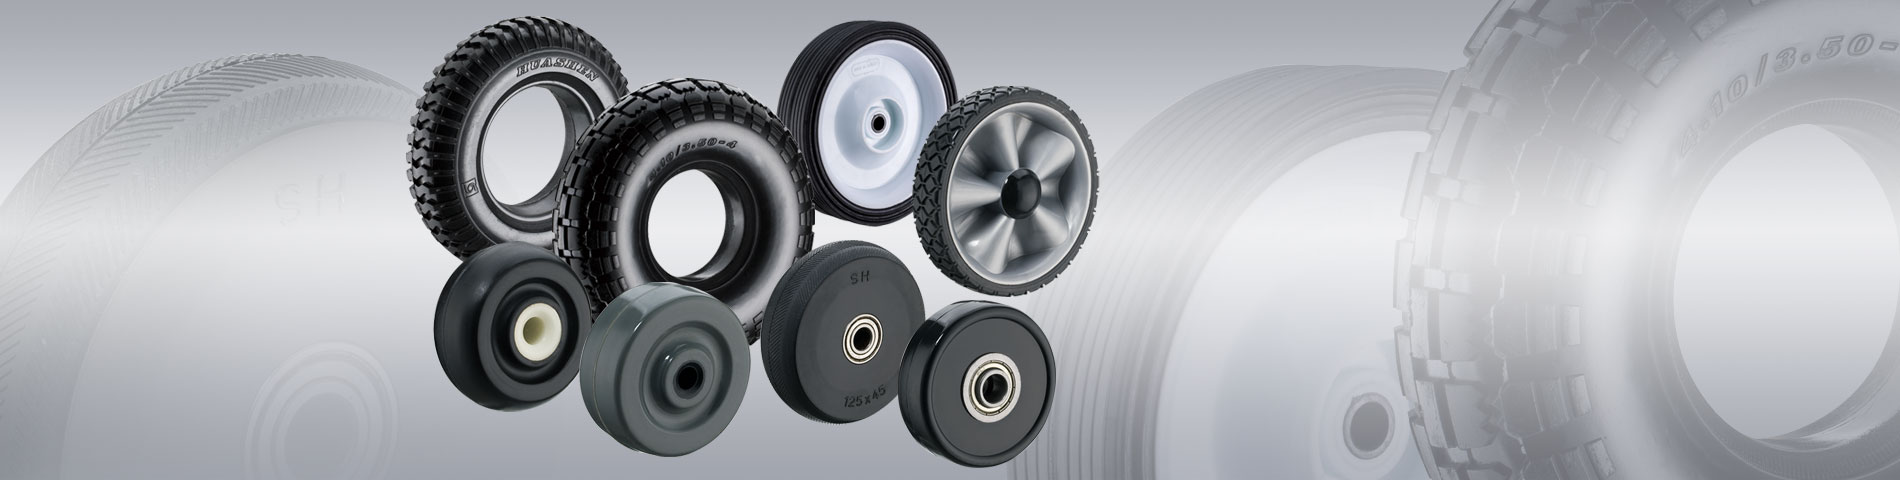 Variety of Rubber Wheels Manufacturing